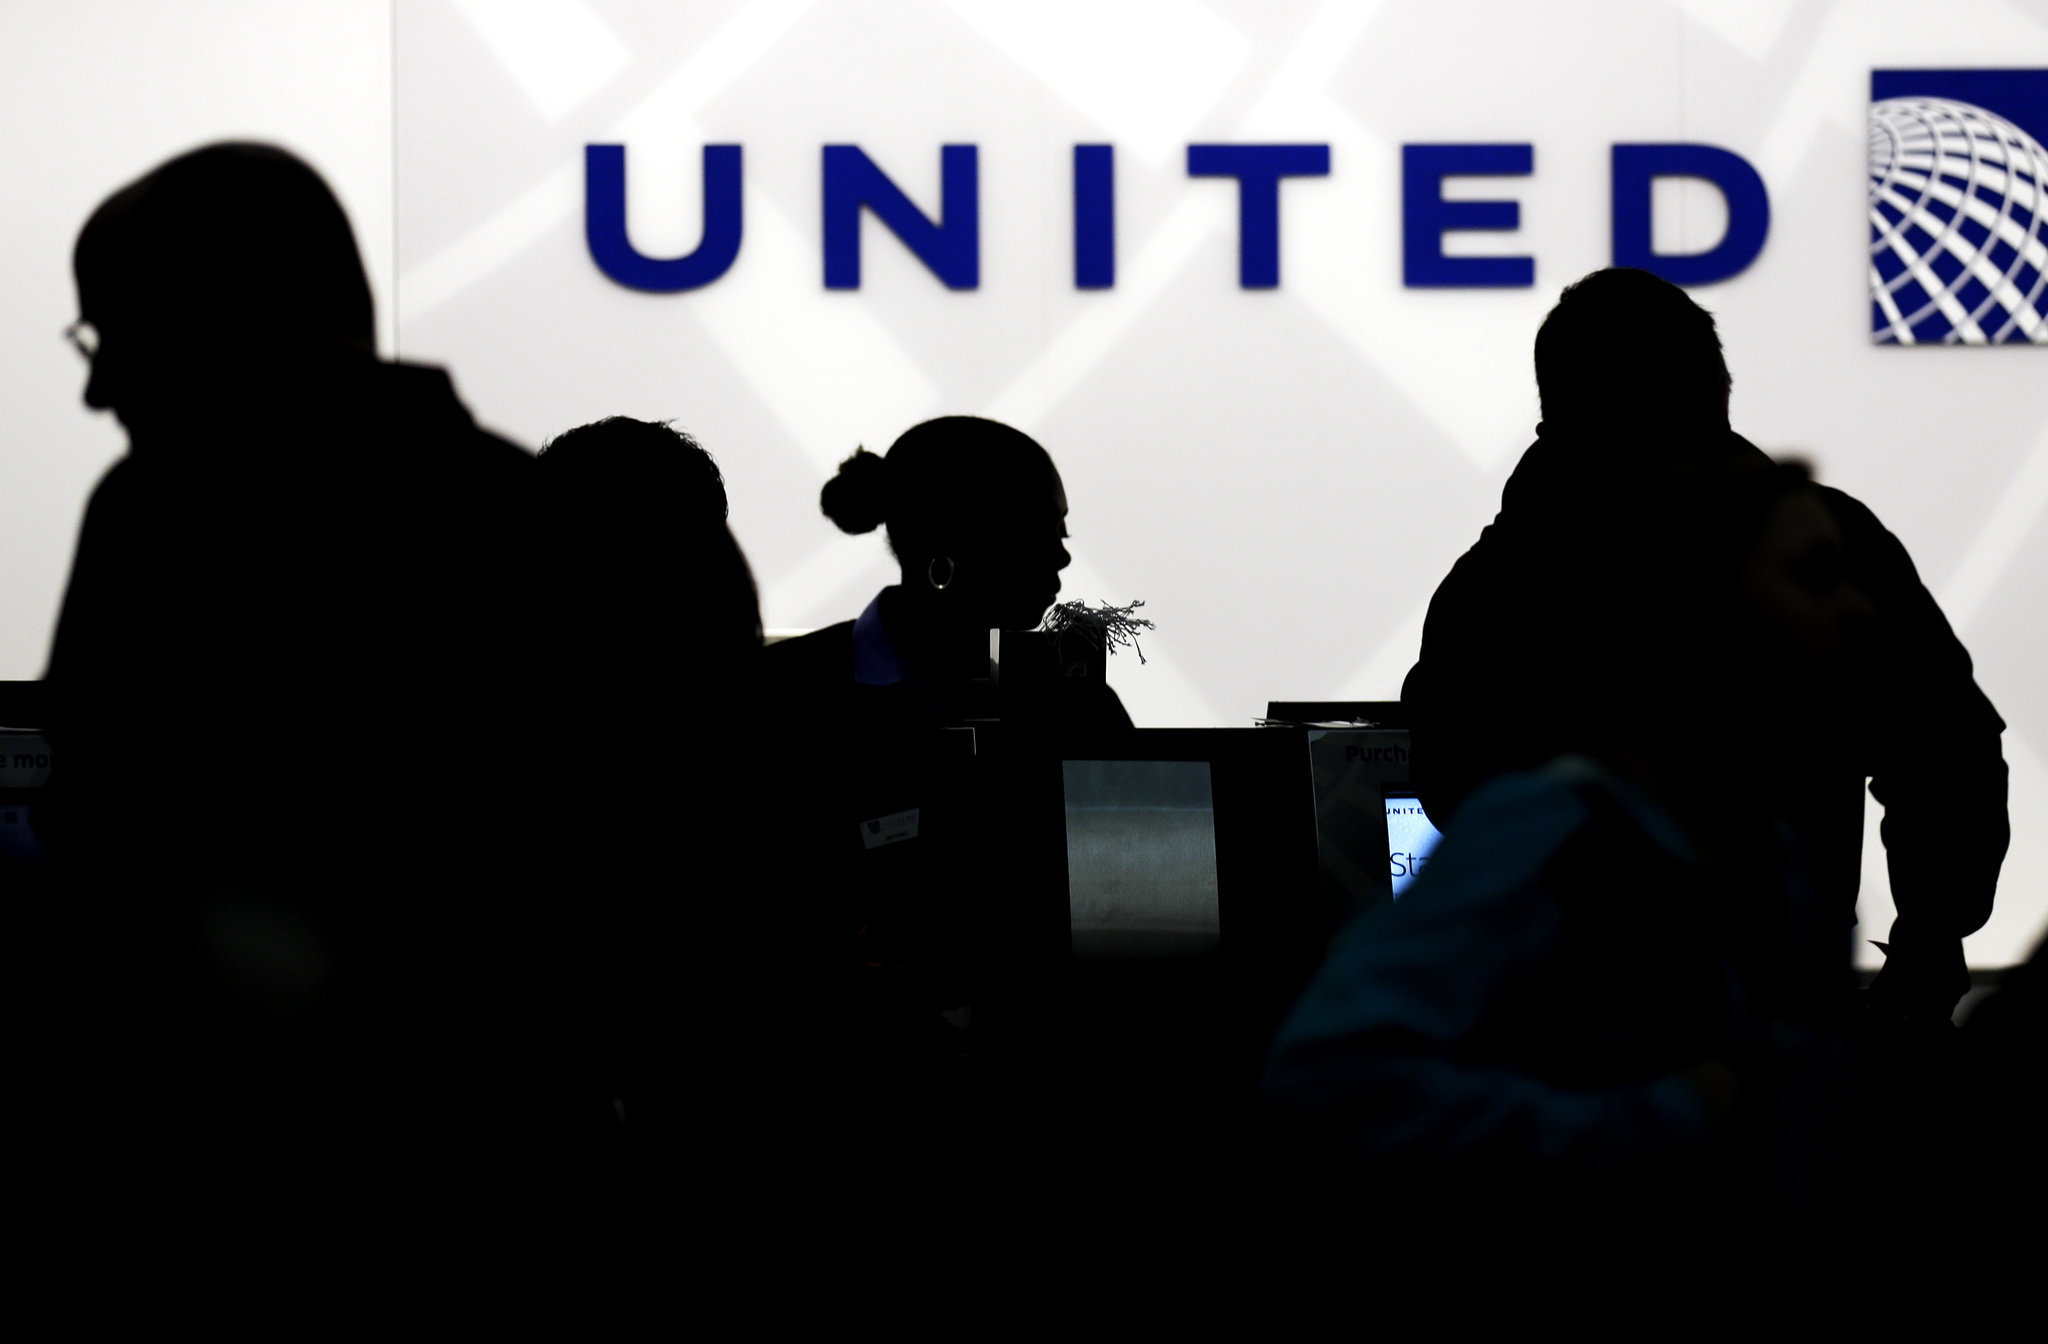 Are you OK being bumped? United reportedly asks during online check-in